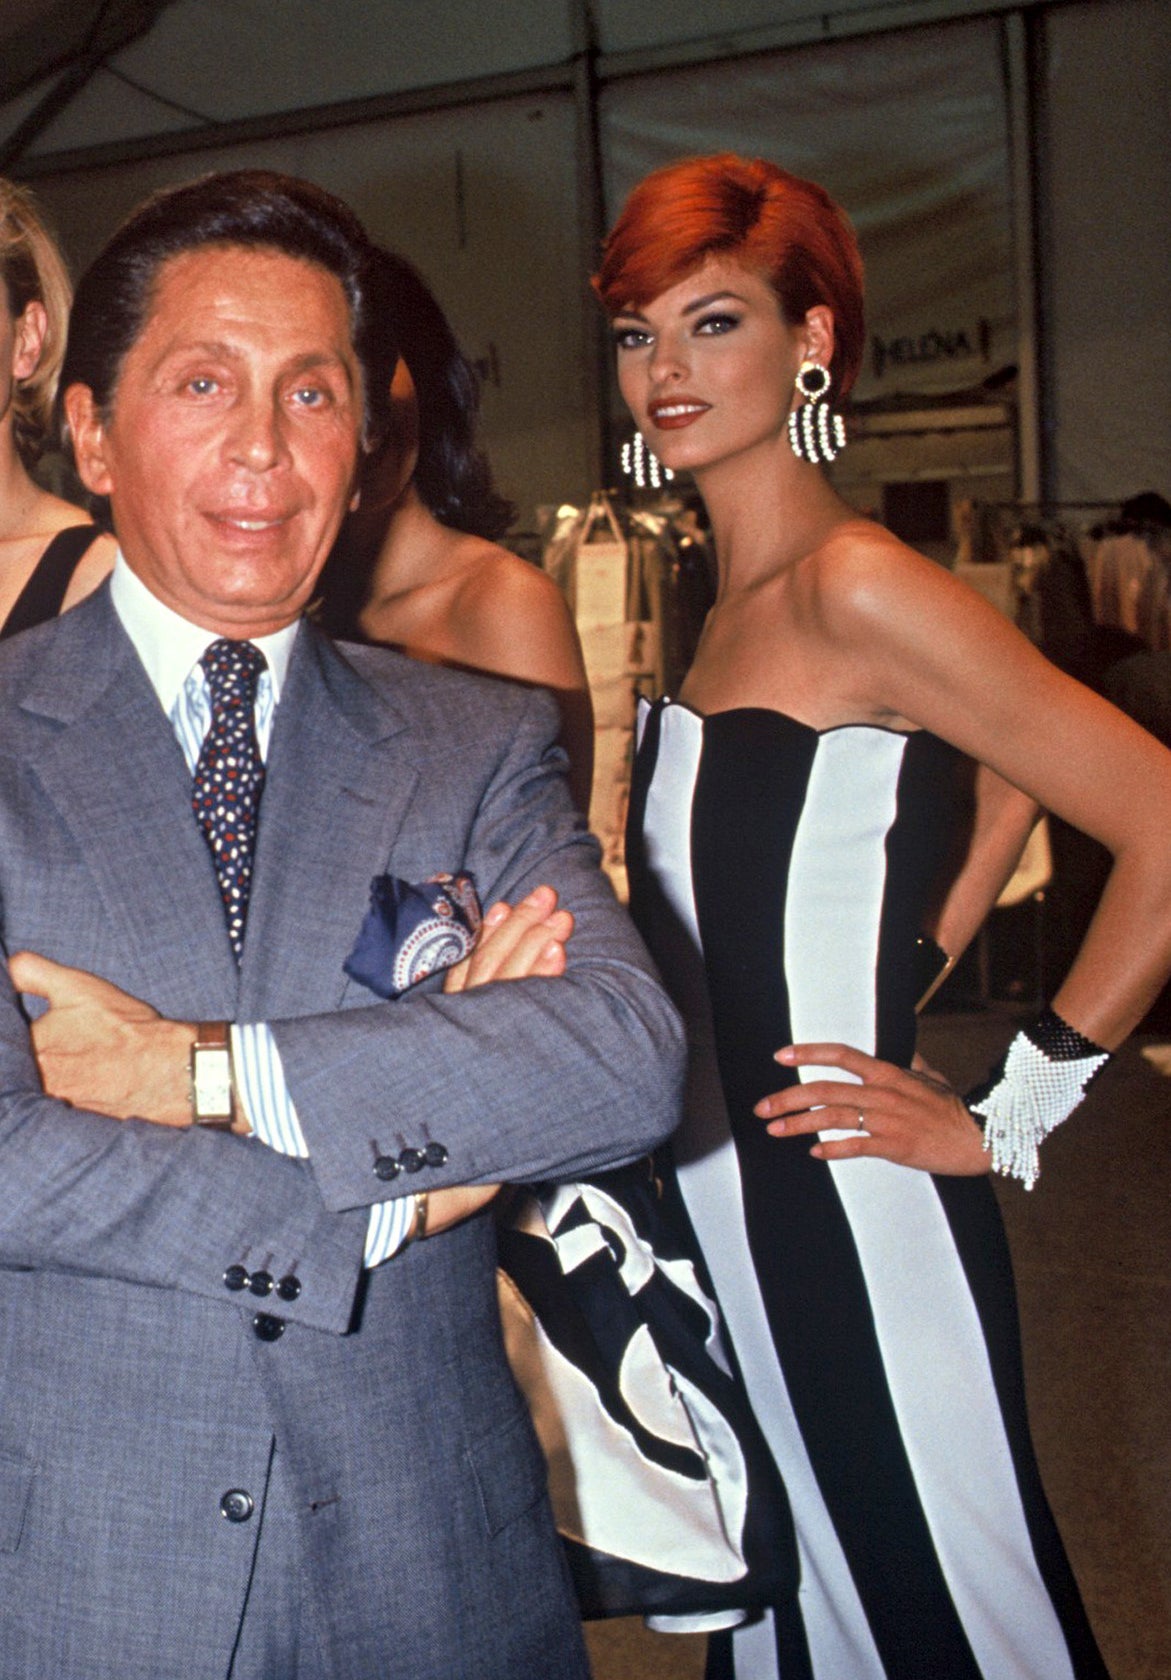 Linda wearing the dress and posing for a photo with the designer Valentino Garavani